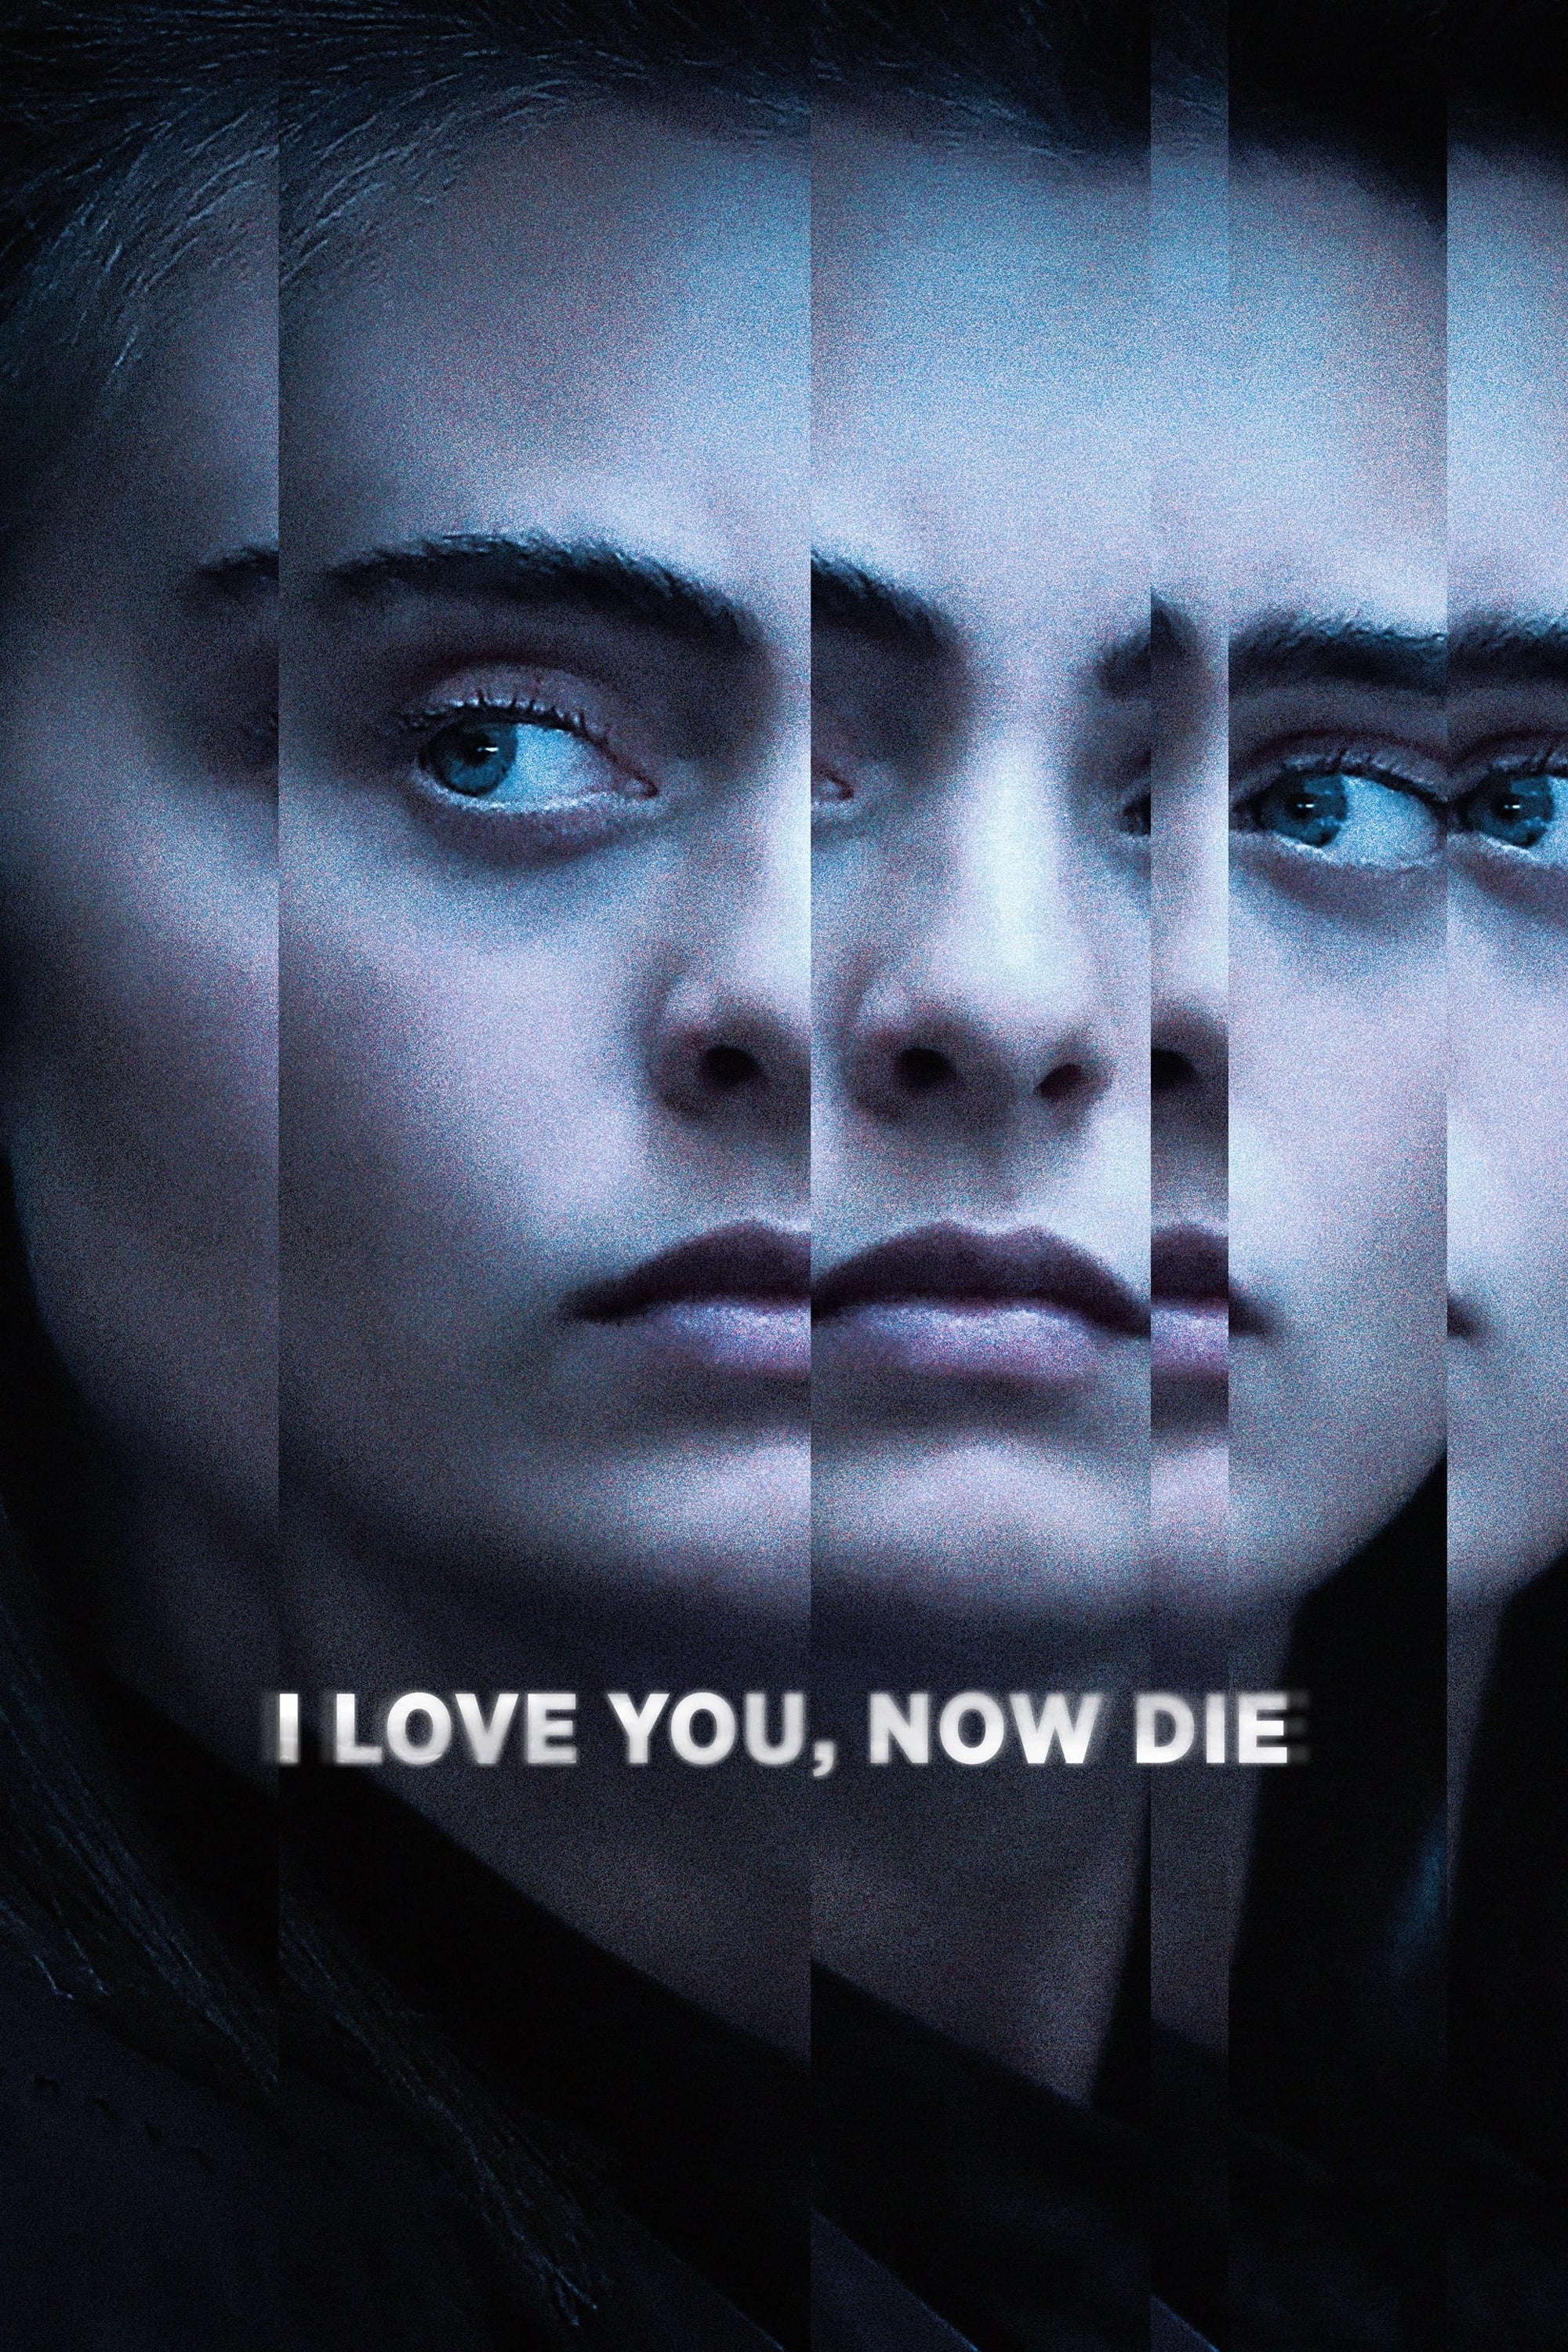 I Love You, Now Die: The Commonwealth v. Michelle Carter TV Shows About Court Case